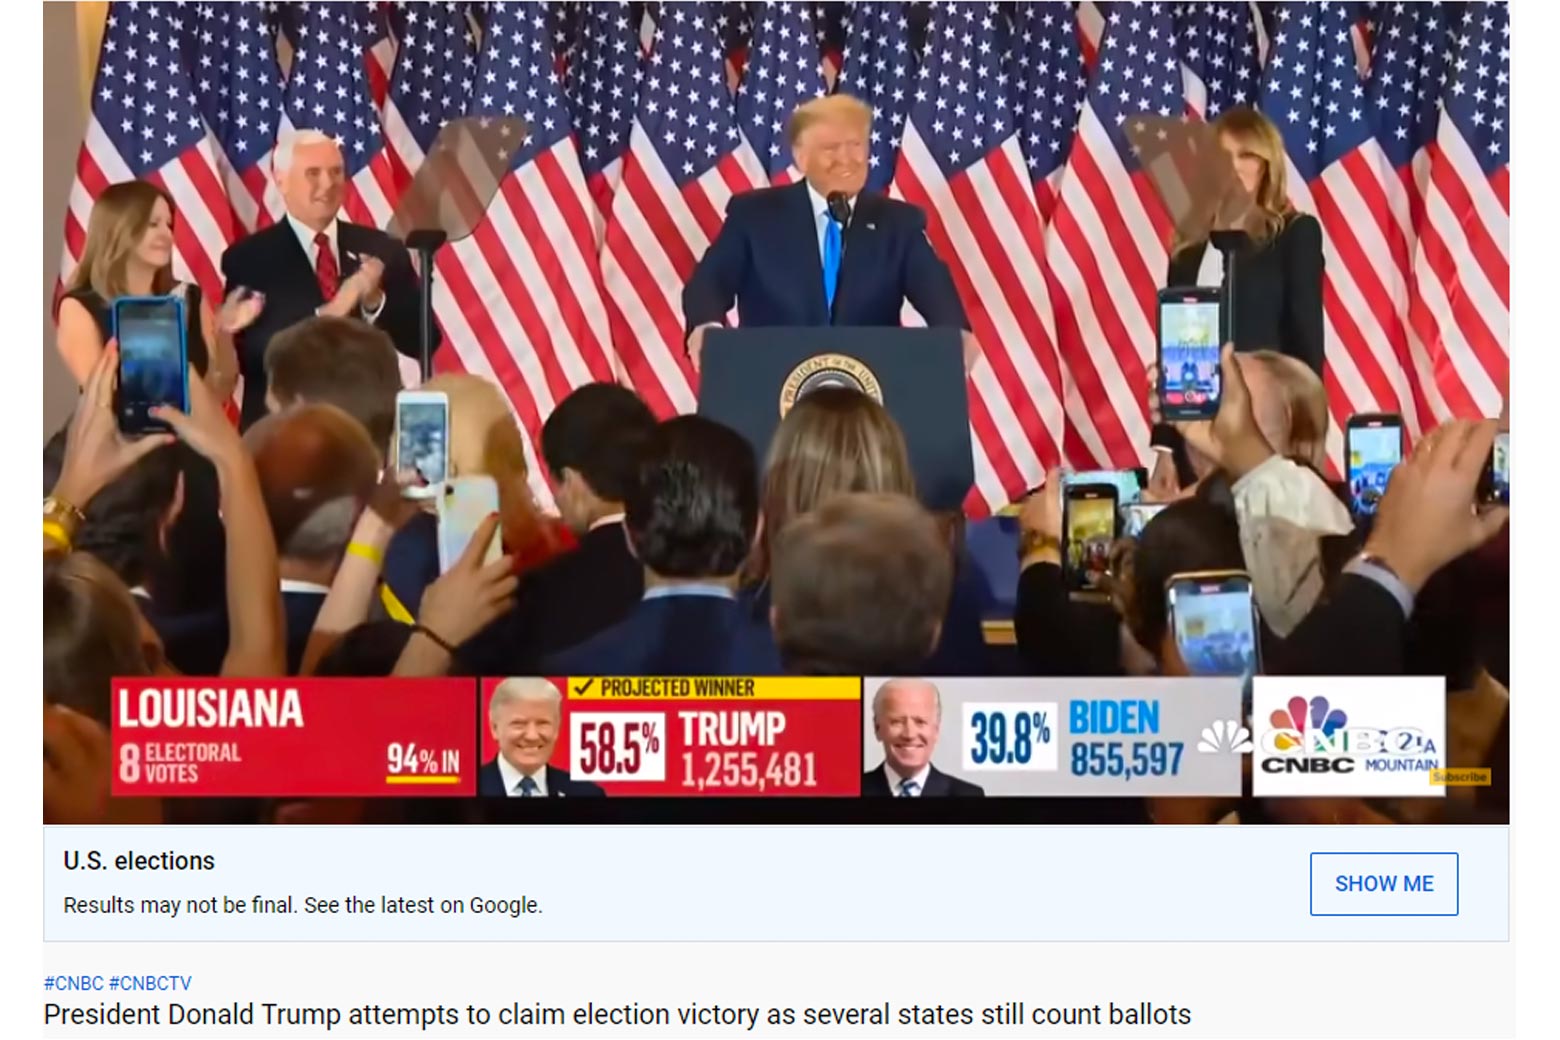 Screenshot from YouTube of a CNBC election broadcast, with a label under the video that says "Results may not be final. See the latest on Google"